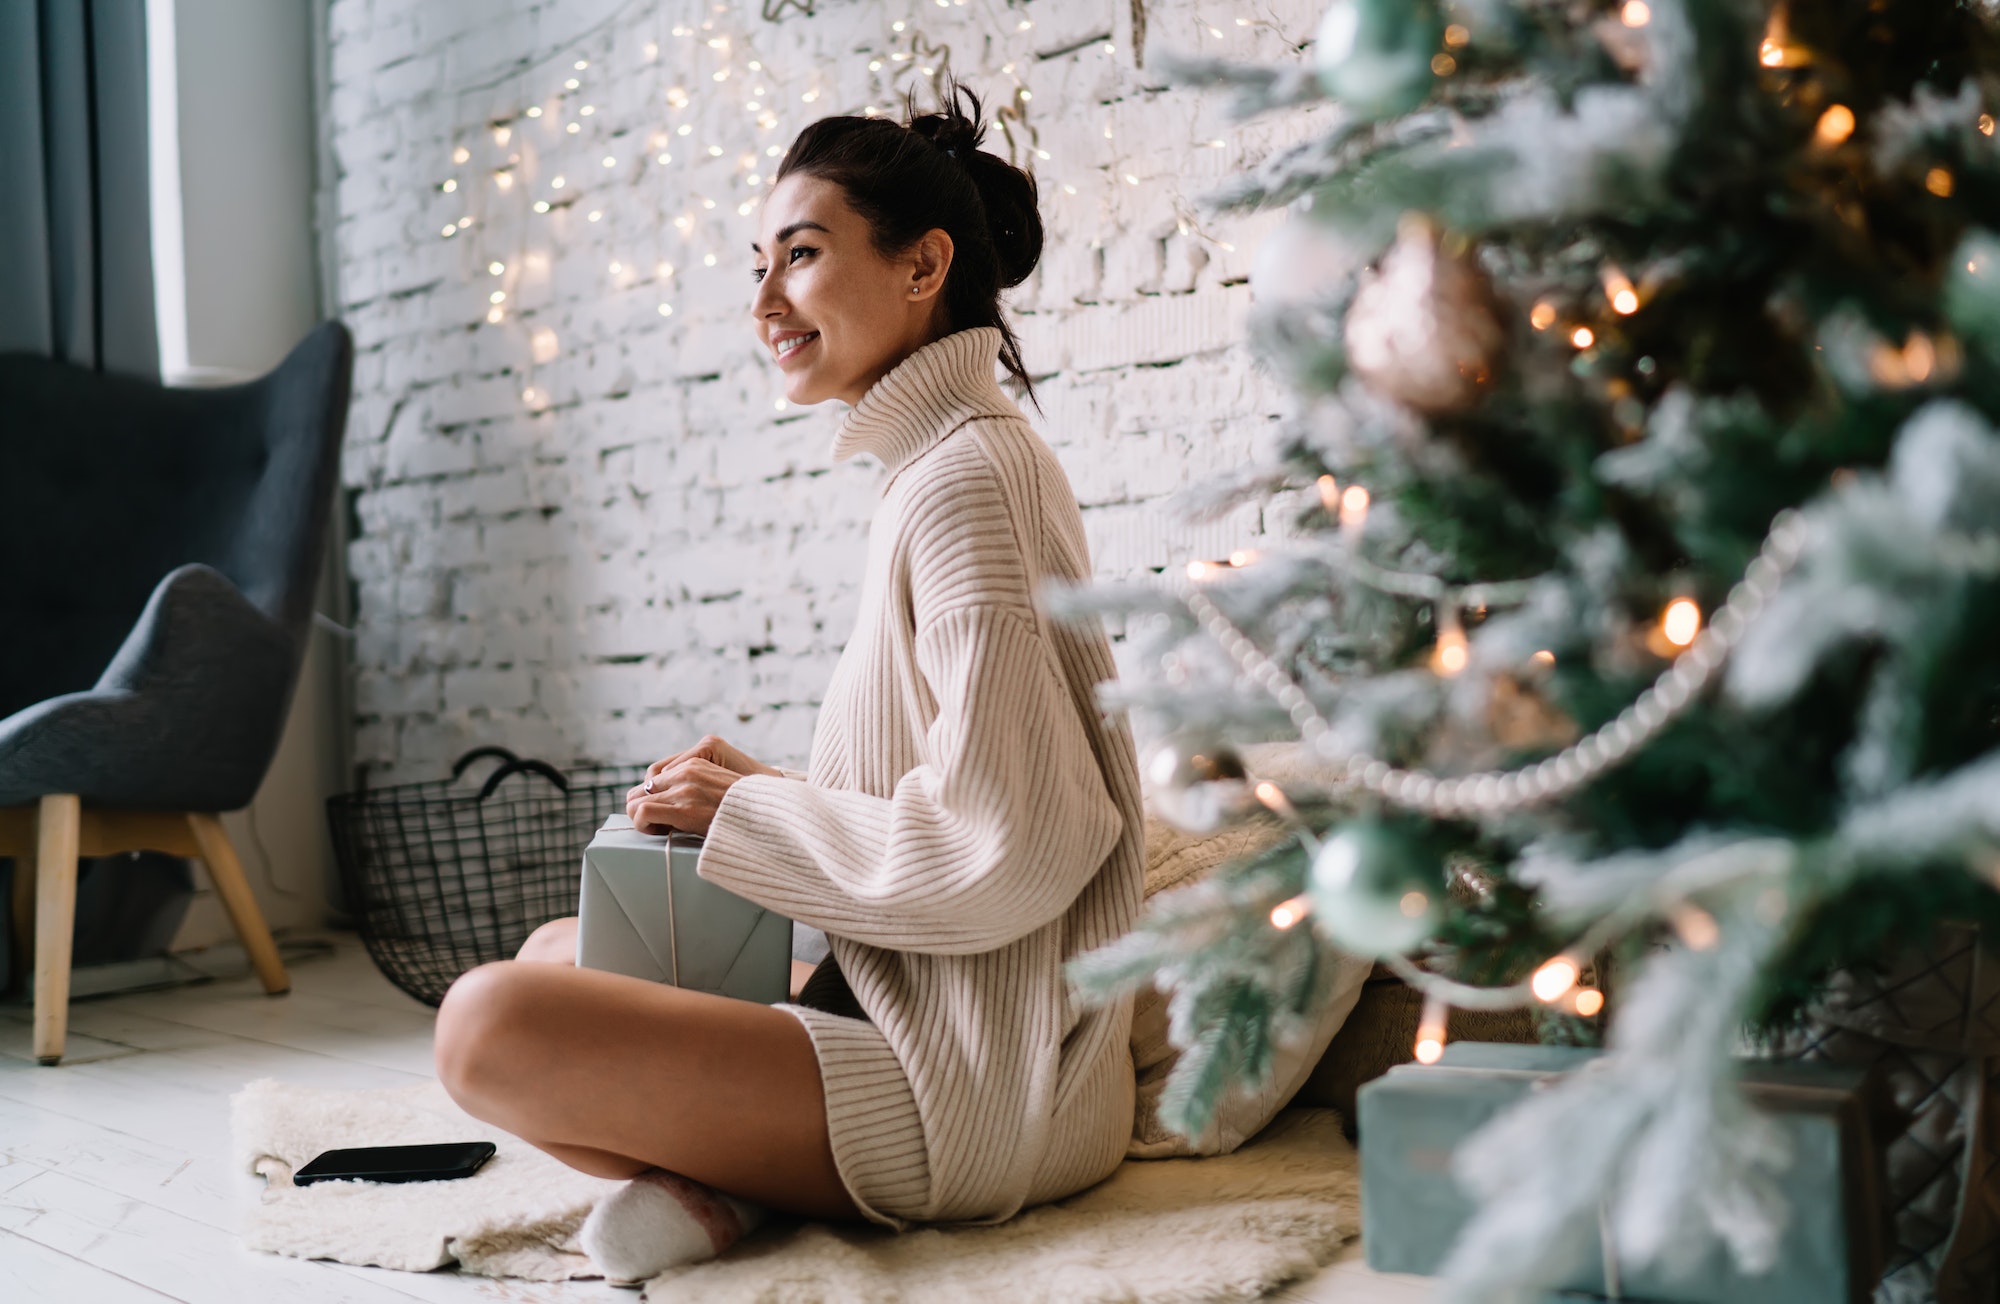 Woman opening gift near Christmas tree at home